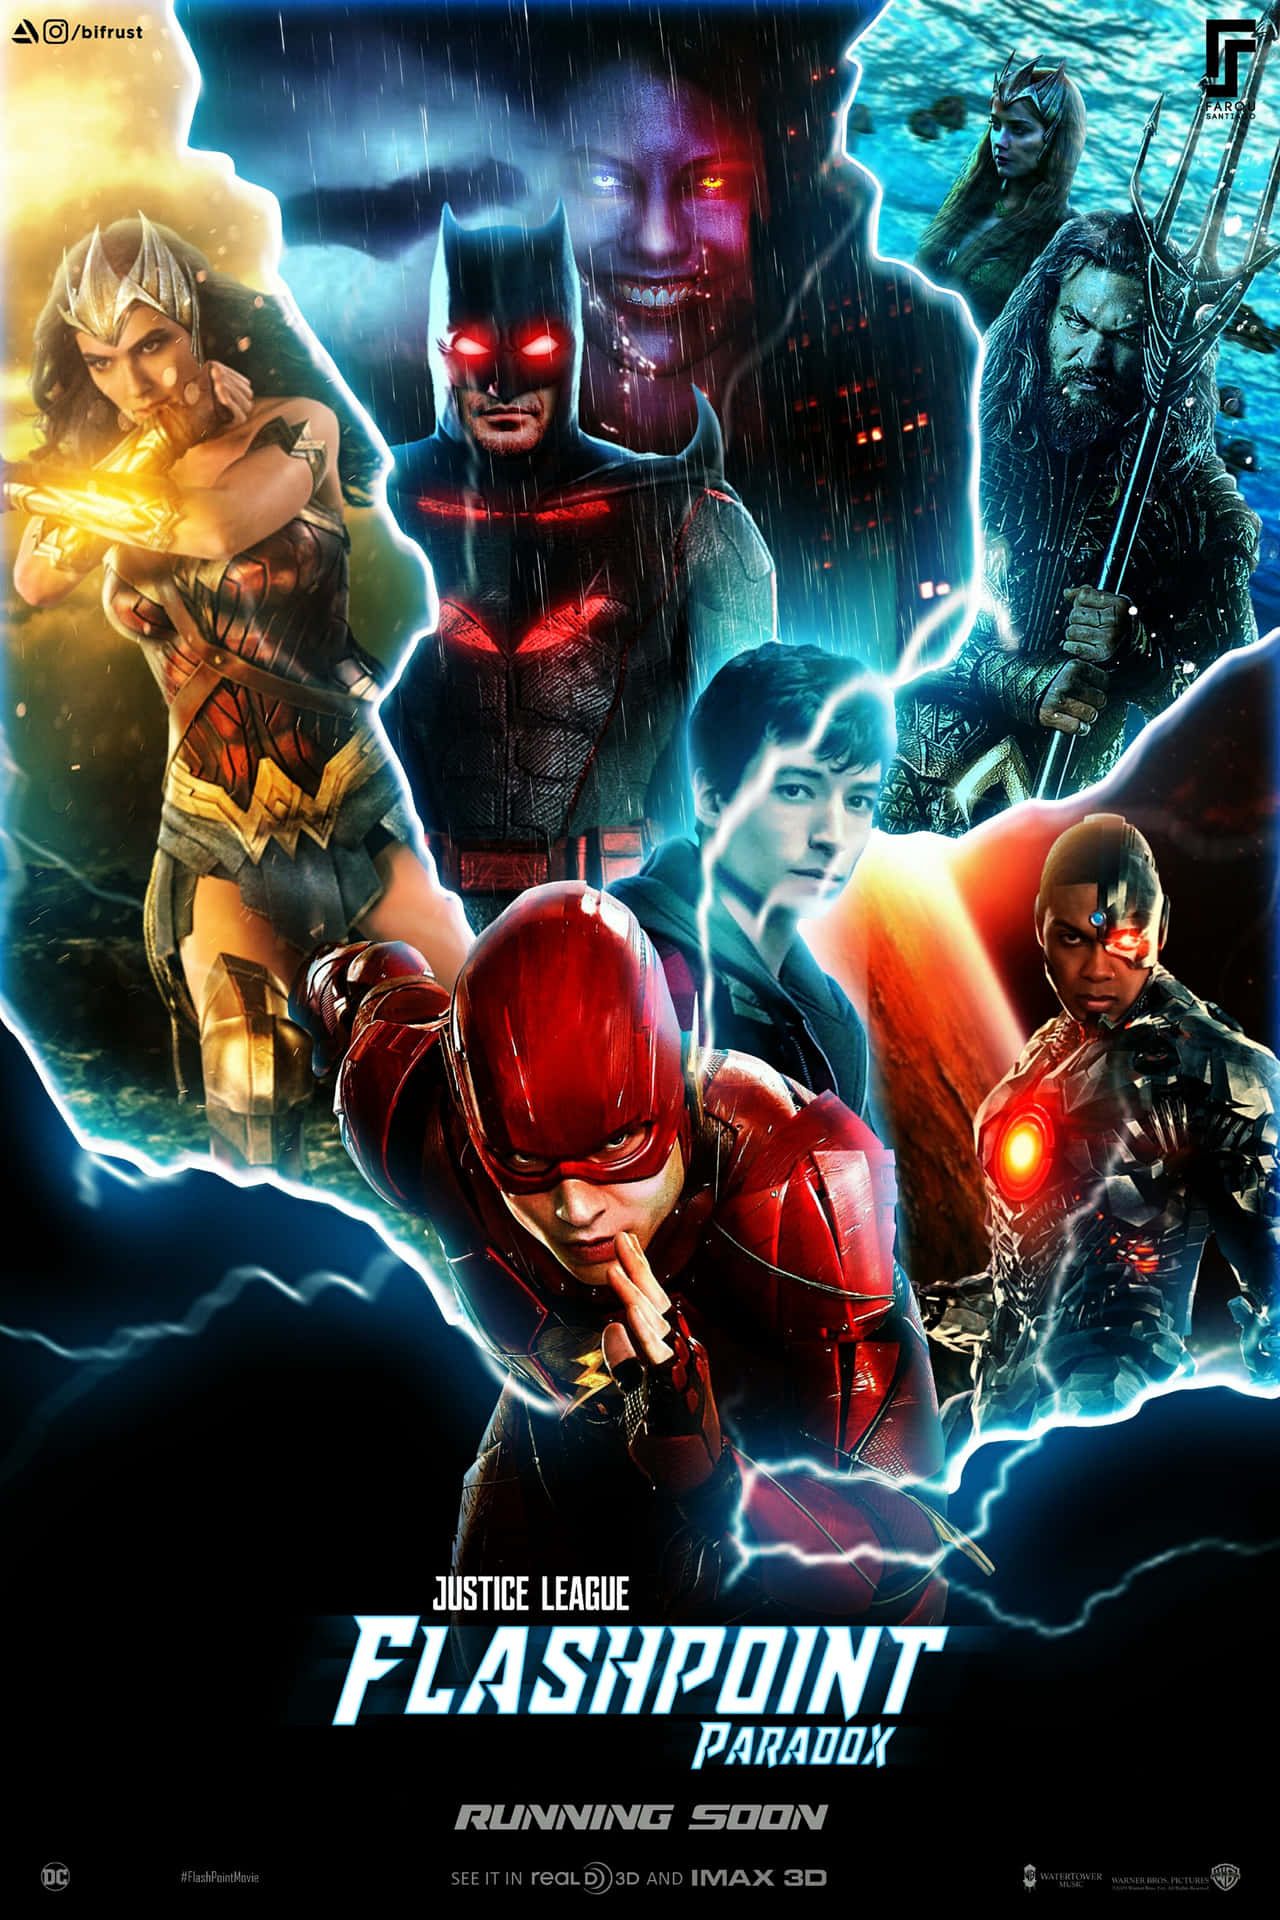 Justice League The Flashpoint Paradox Movie Poster featuring Barry Allen and Thomas Wayne. Wallpaper